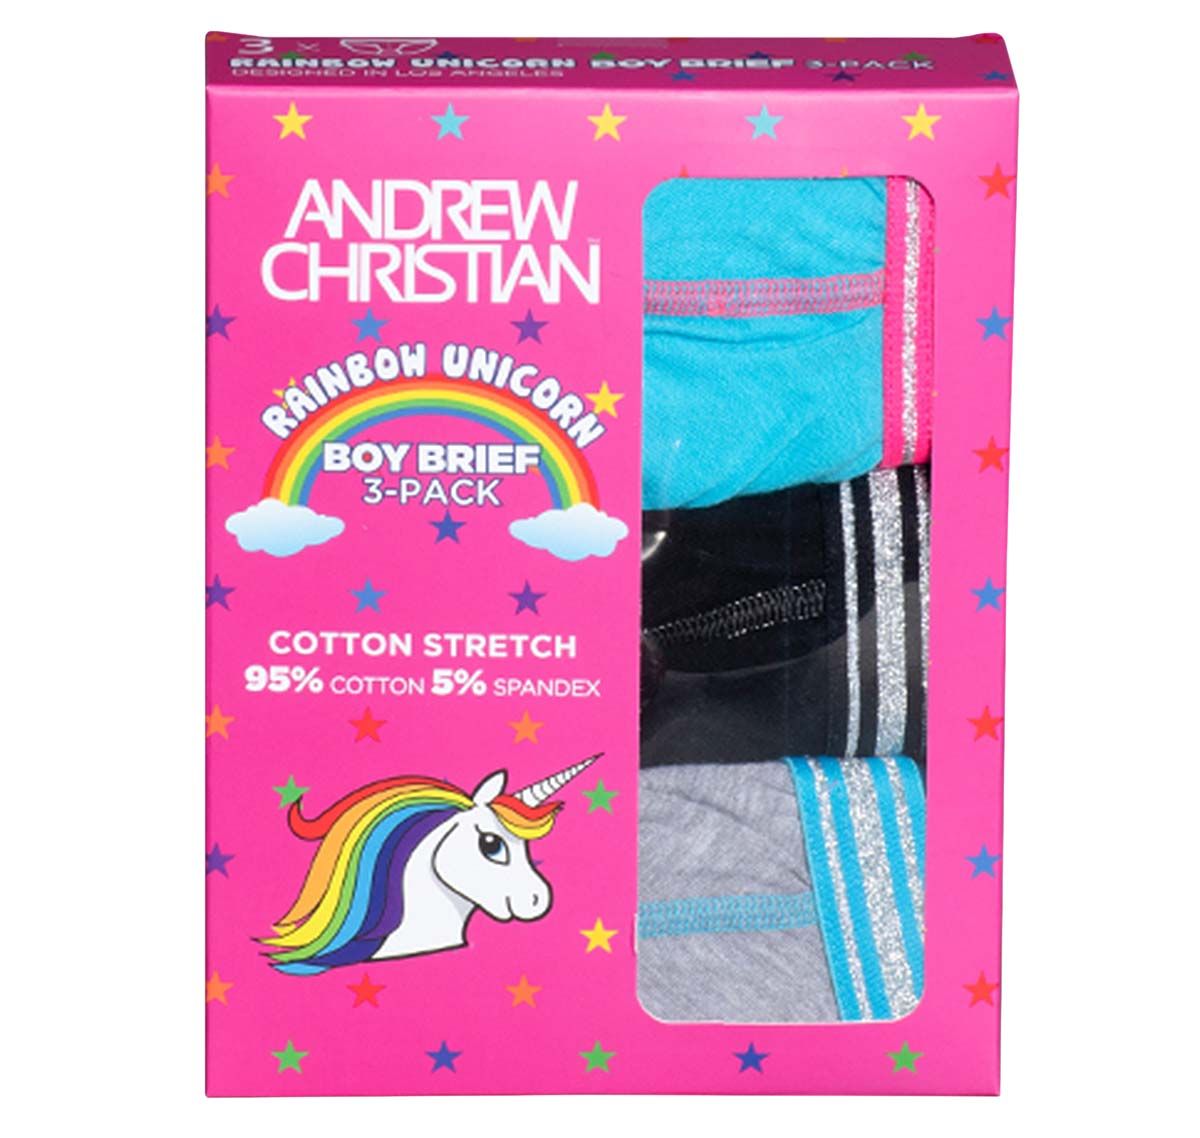 Andrew Christian 3 Paquet Slips BOY BRIEF UNICORN 3-PACK w/Almost Naked 91440, noir/bleu/gris